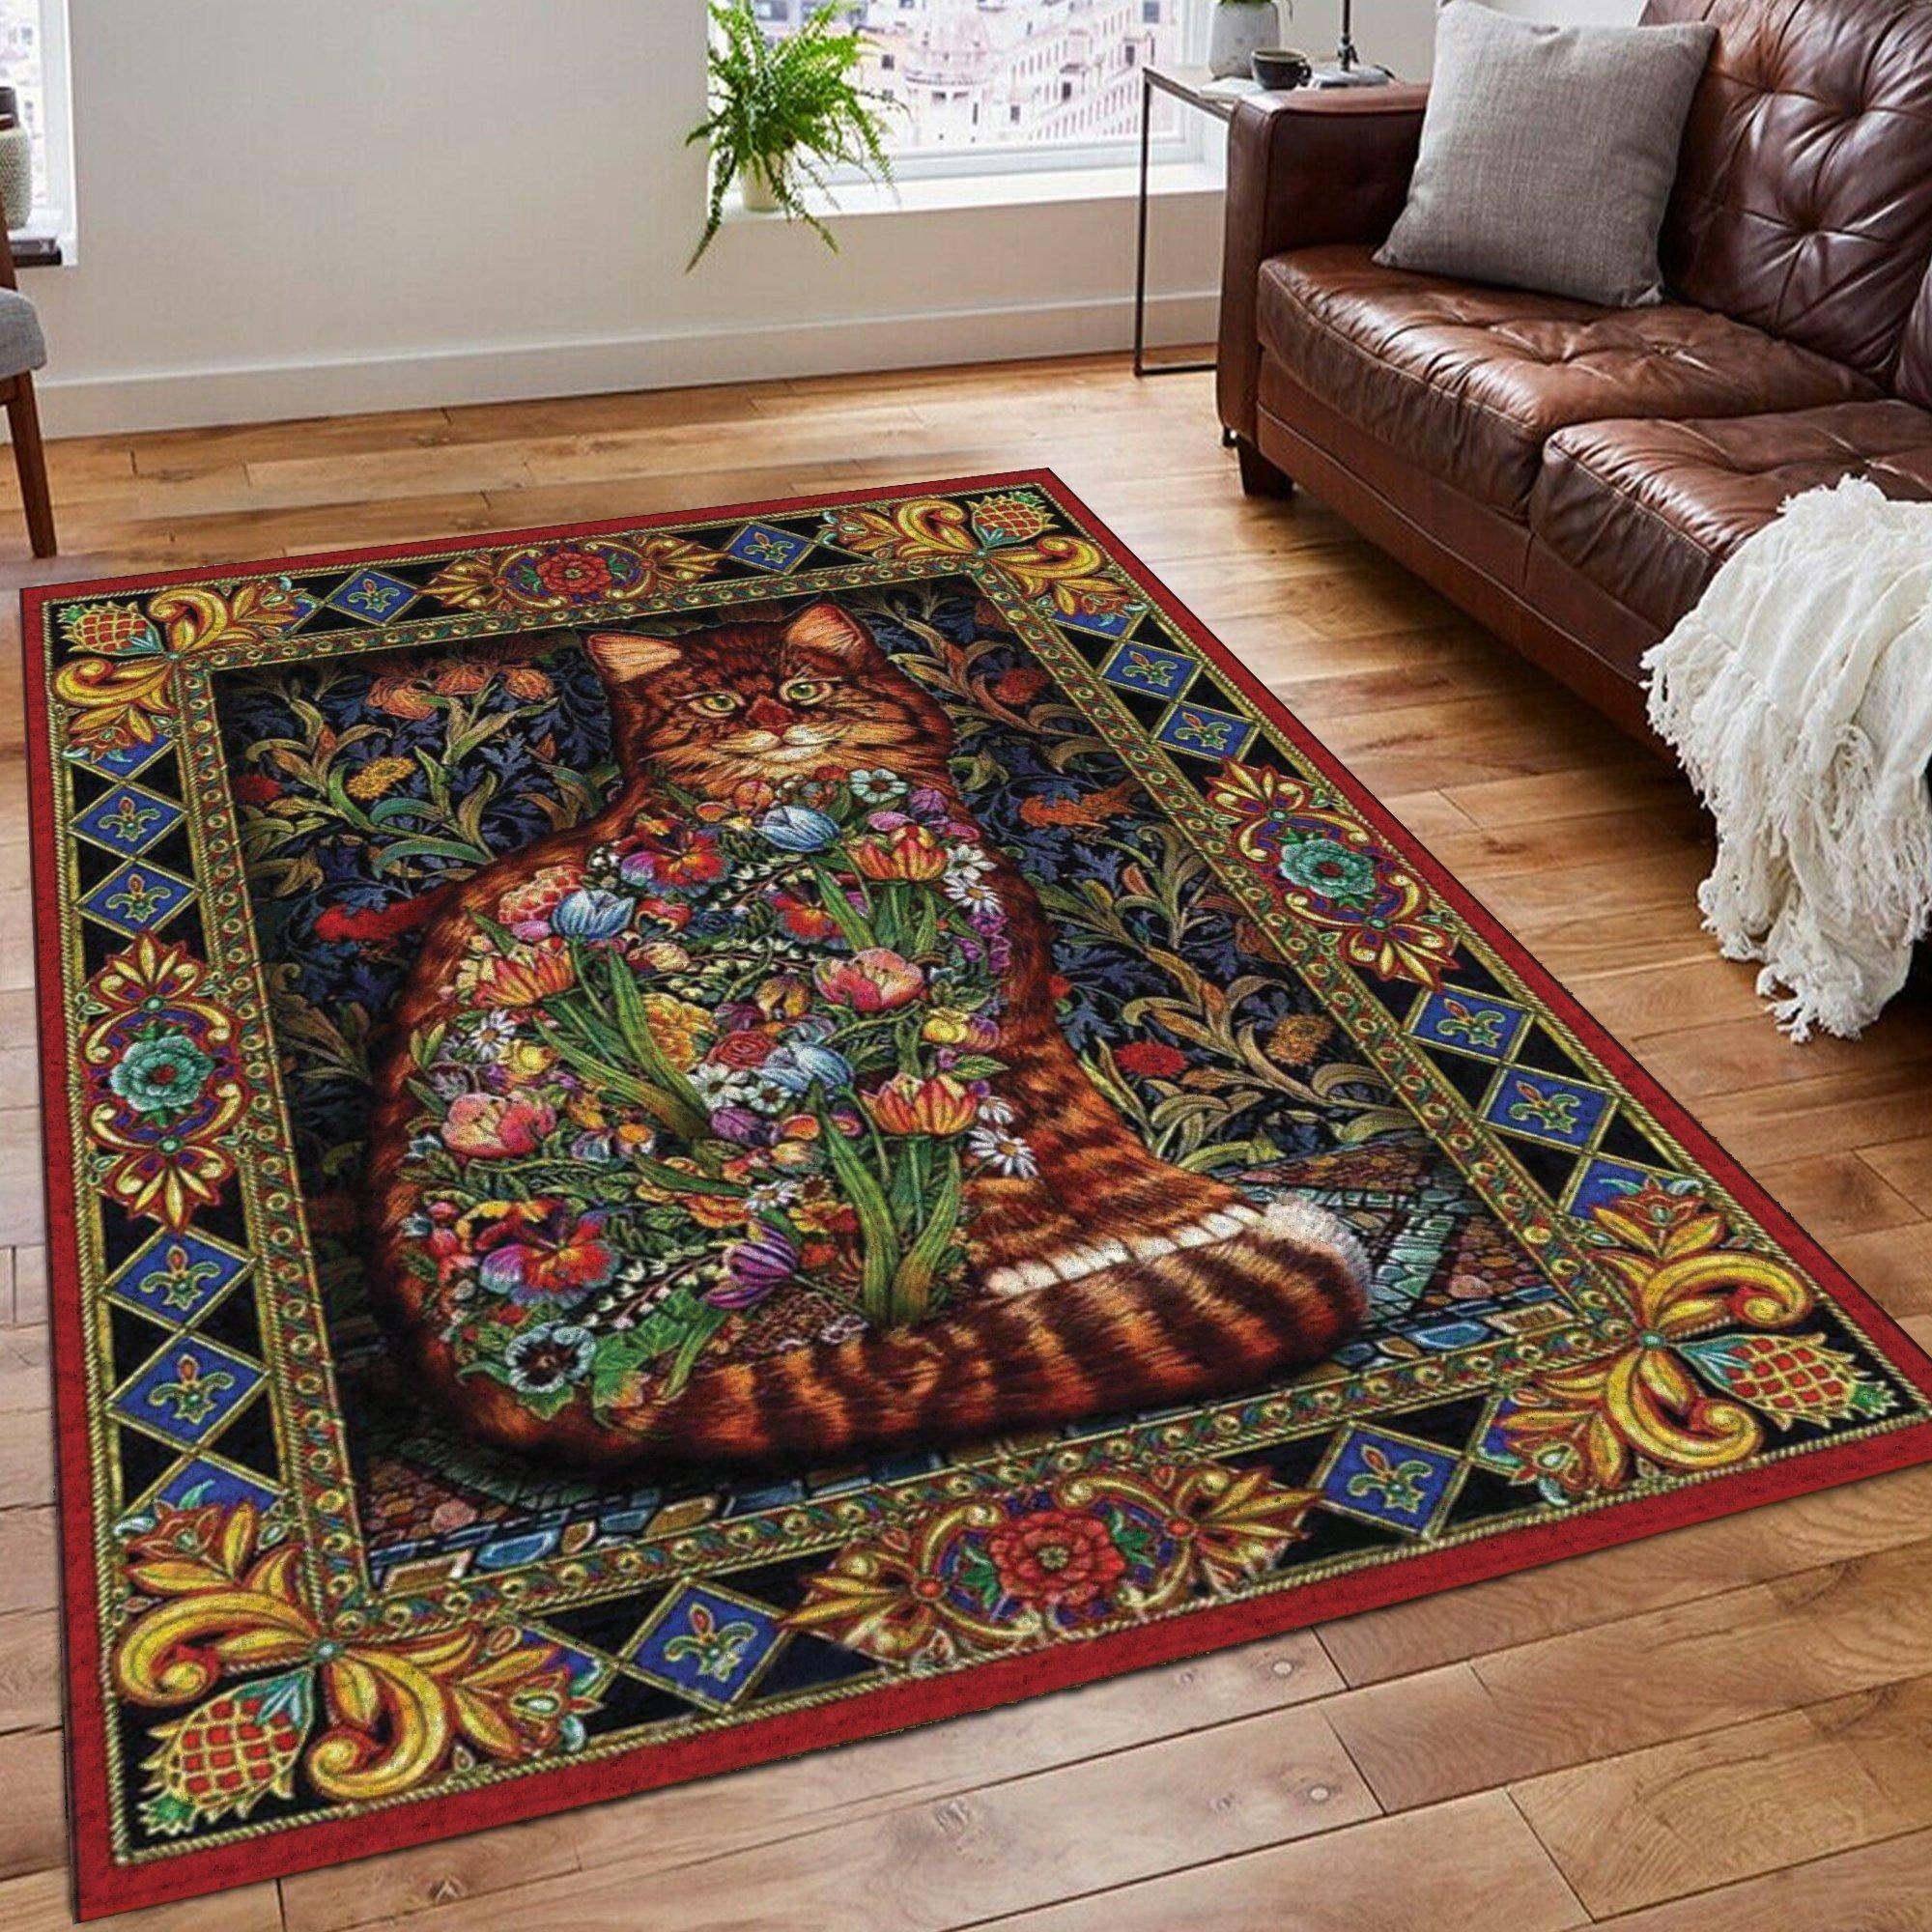 Cat And Flower So Cool Rug Chrismas Gift - Indoor Outdoor Rugs 1